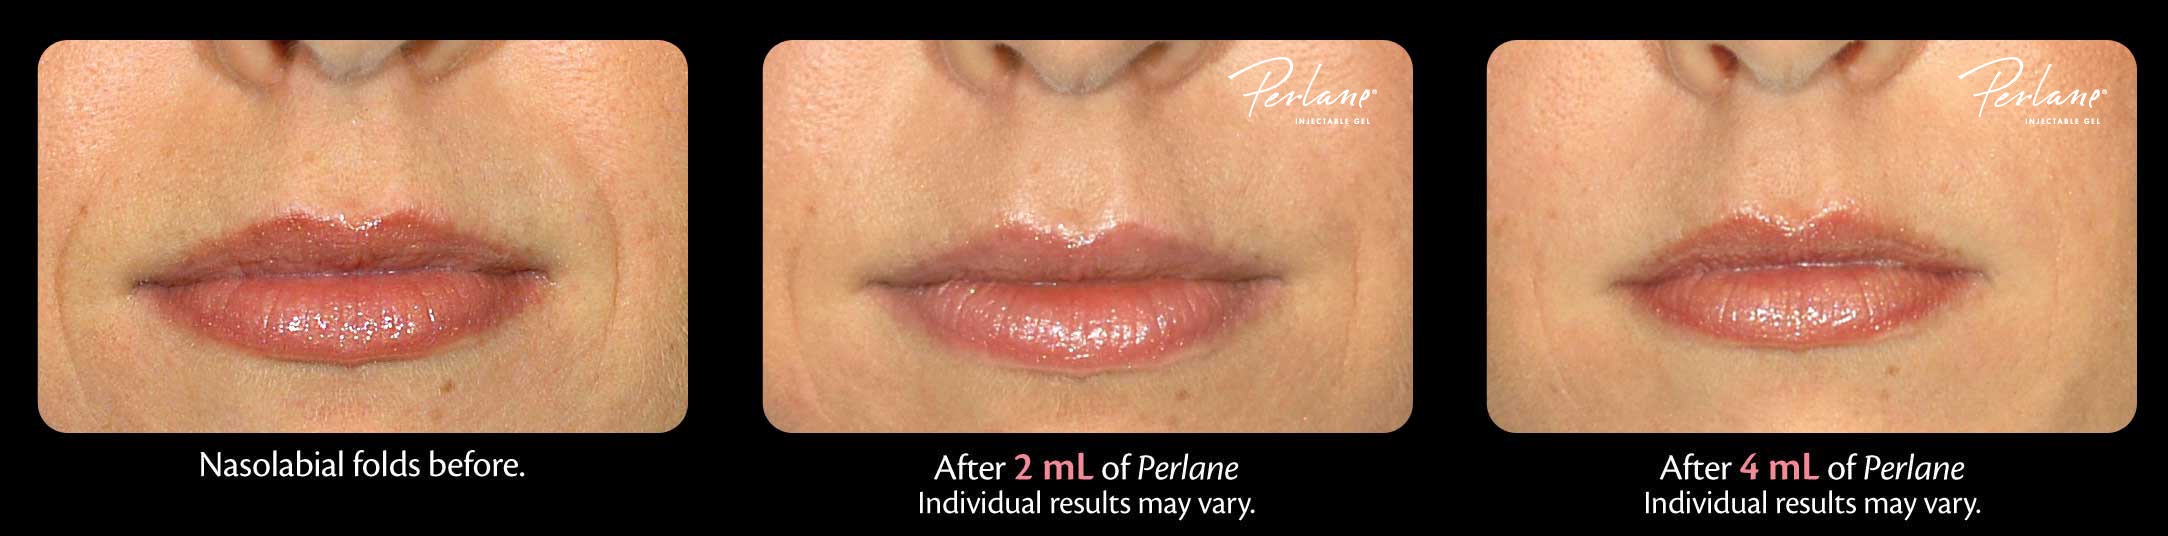 Perlane: Uses And Benefits of The Dermal Filler